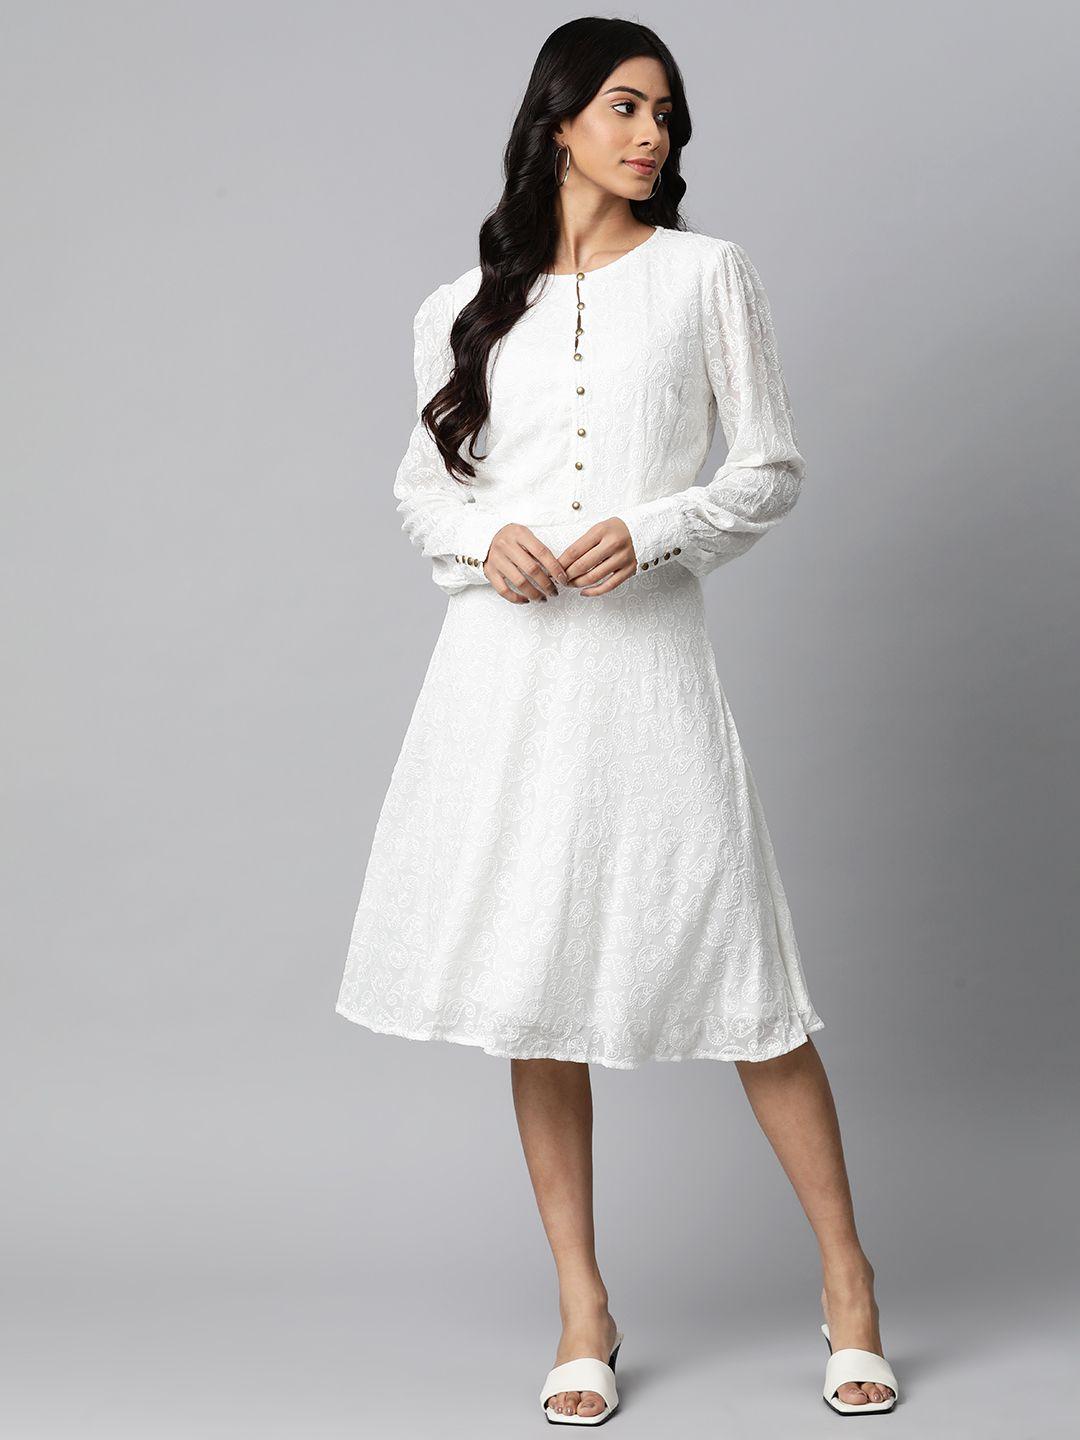 marks-&-spencer-off-white-ethnic-motifs-embroidered-a-line-midi-dress